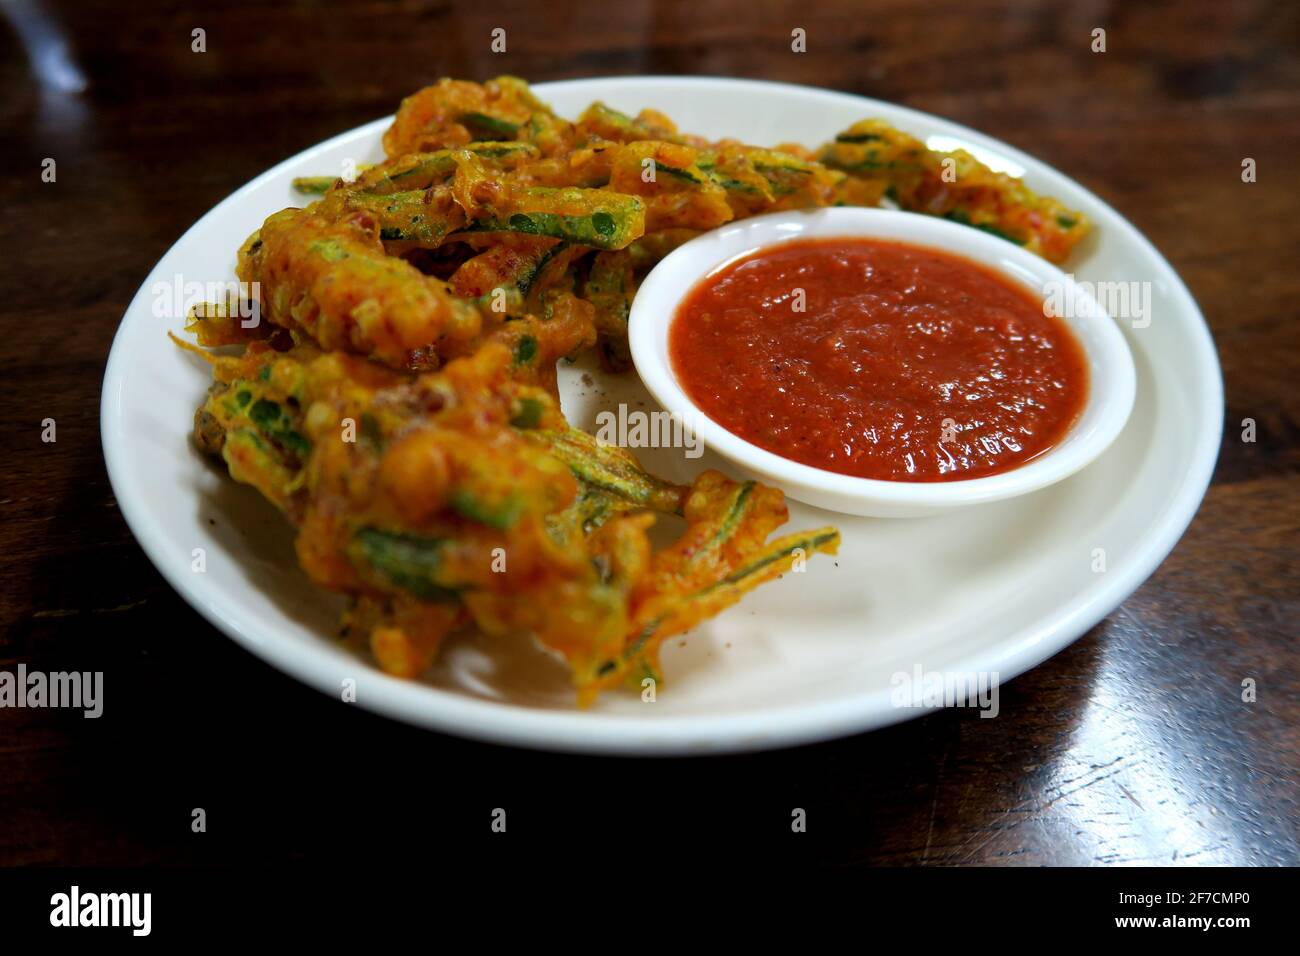 Bhindi (Ladies Fingers)  - Flour Dusted, Spice Dusted and Fried Stock Photo